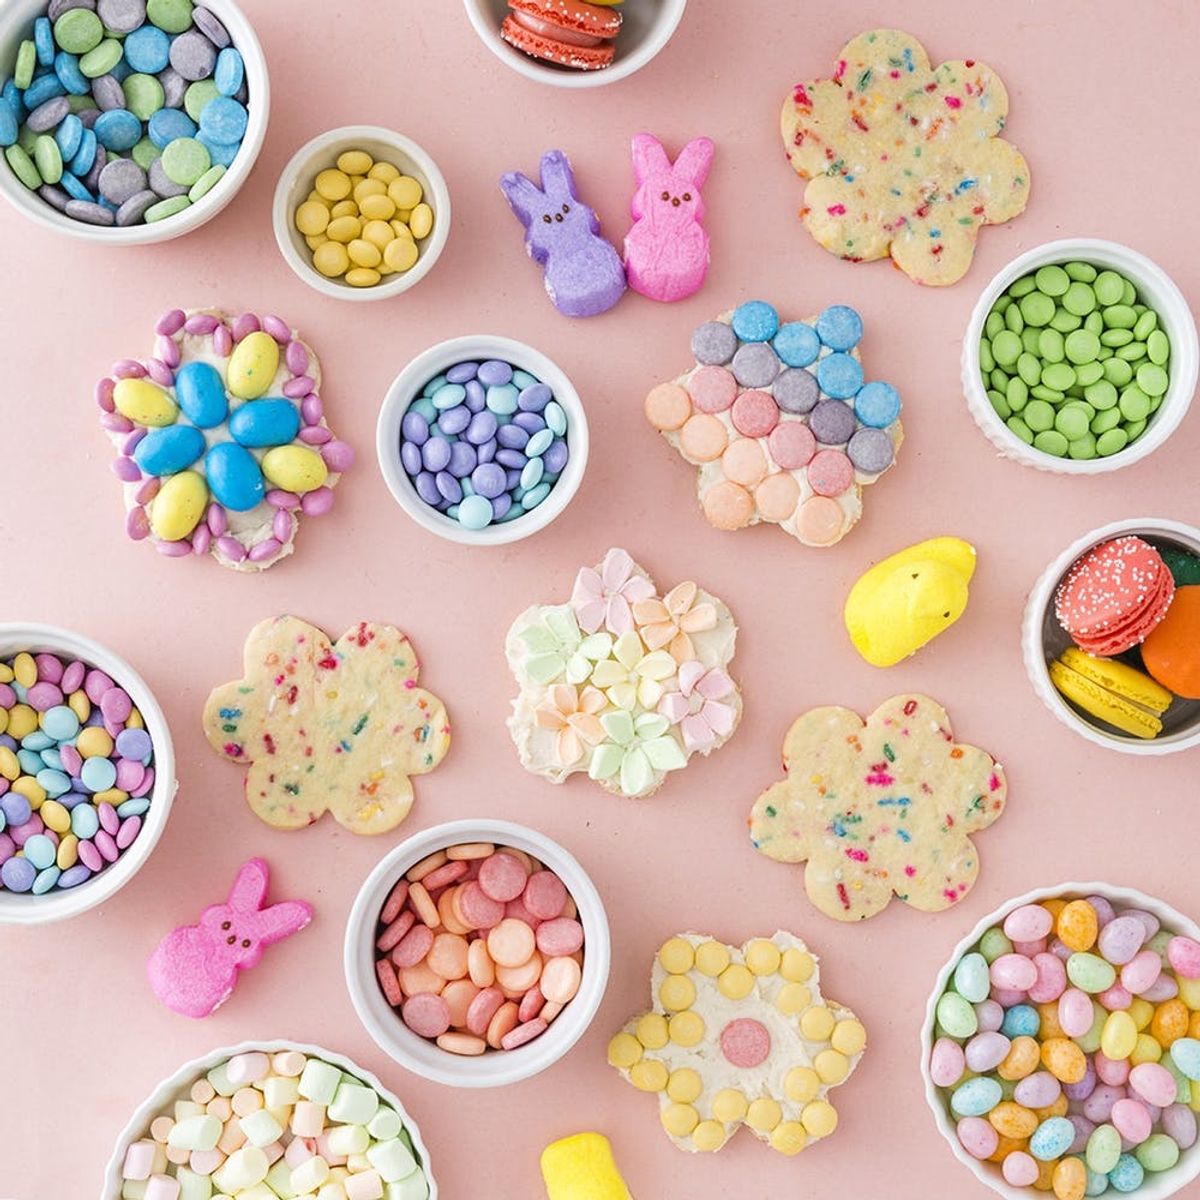 This Funfetti Sugar Cookie Recipe Will Complete Every Easter Basket